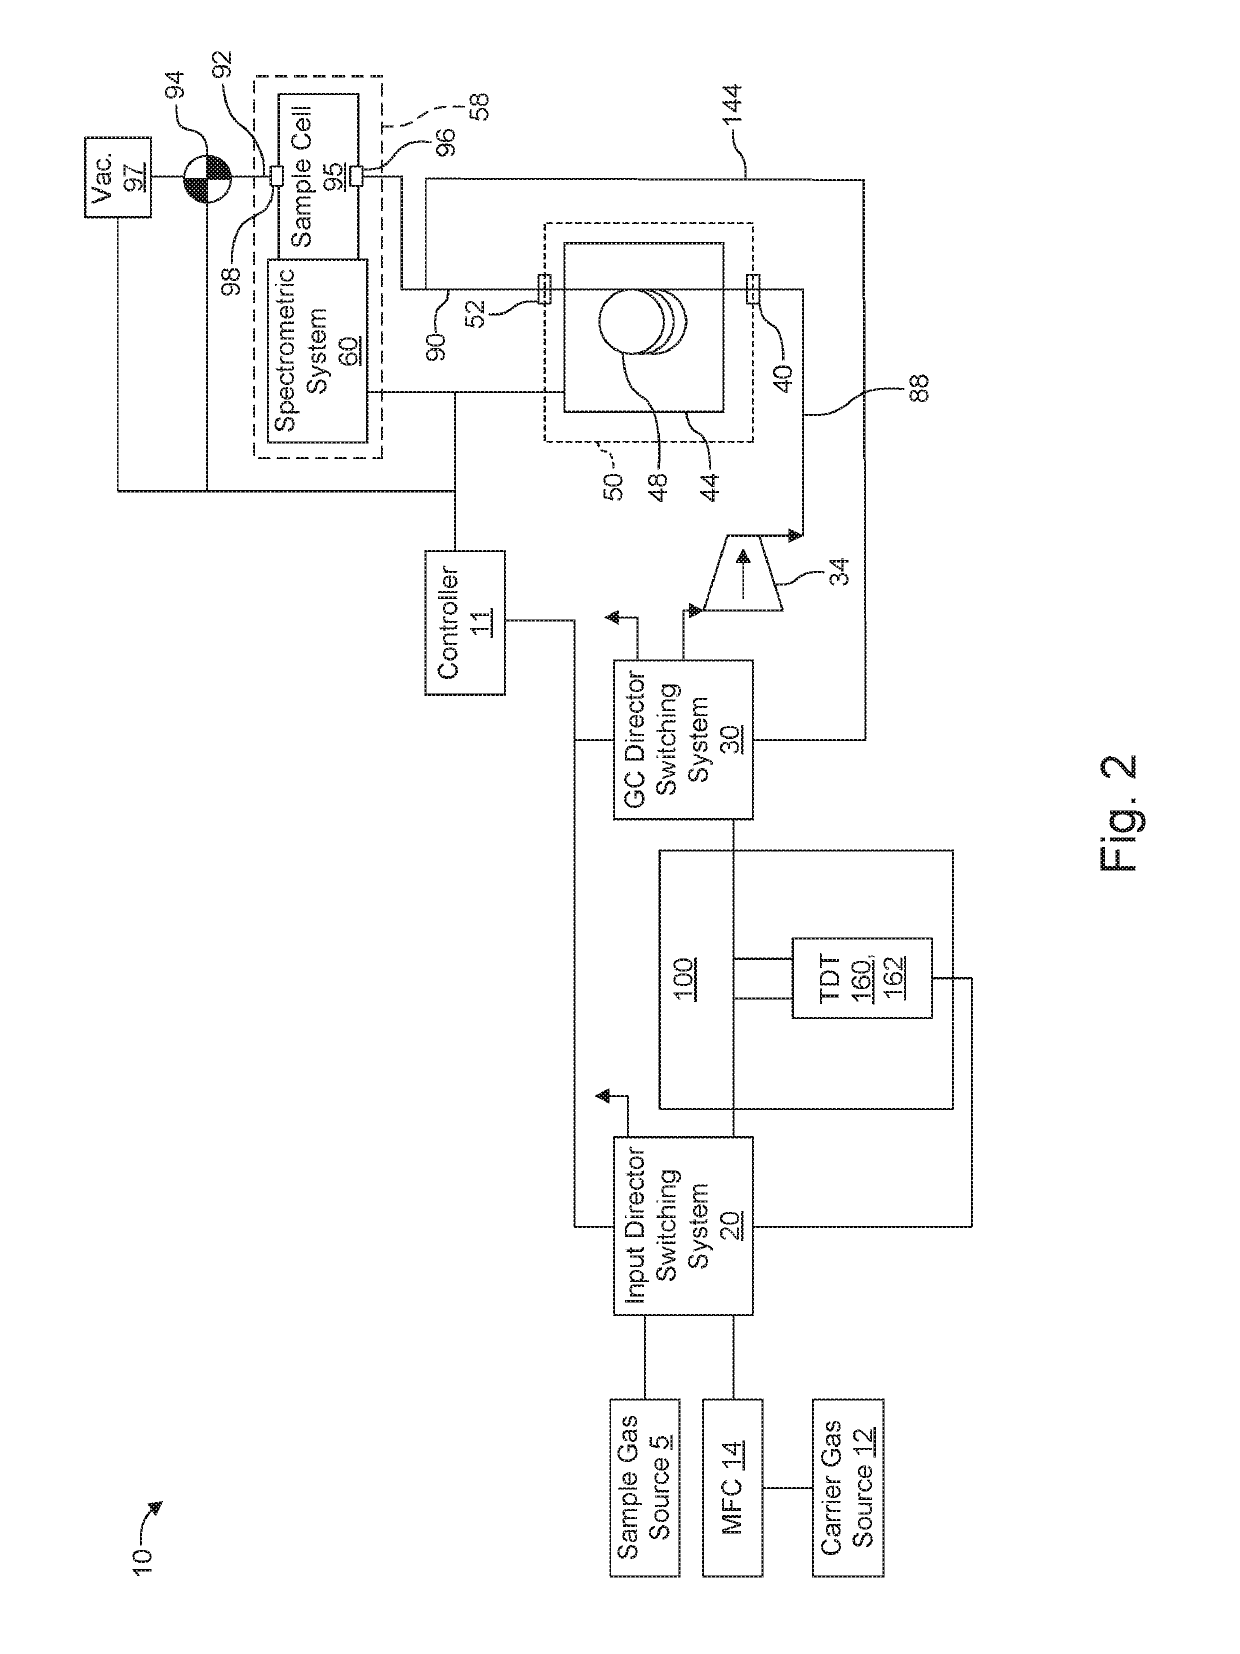 Thermal desorption tube collection system and method